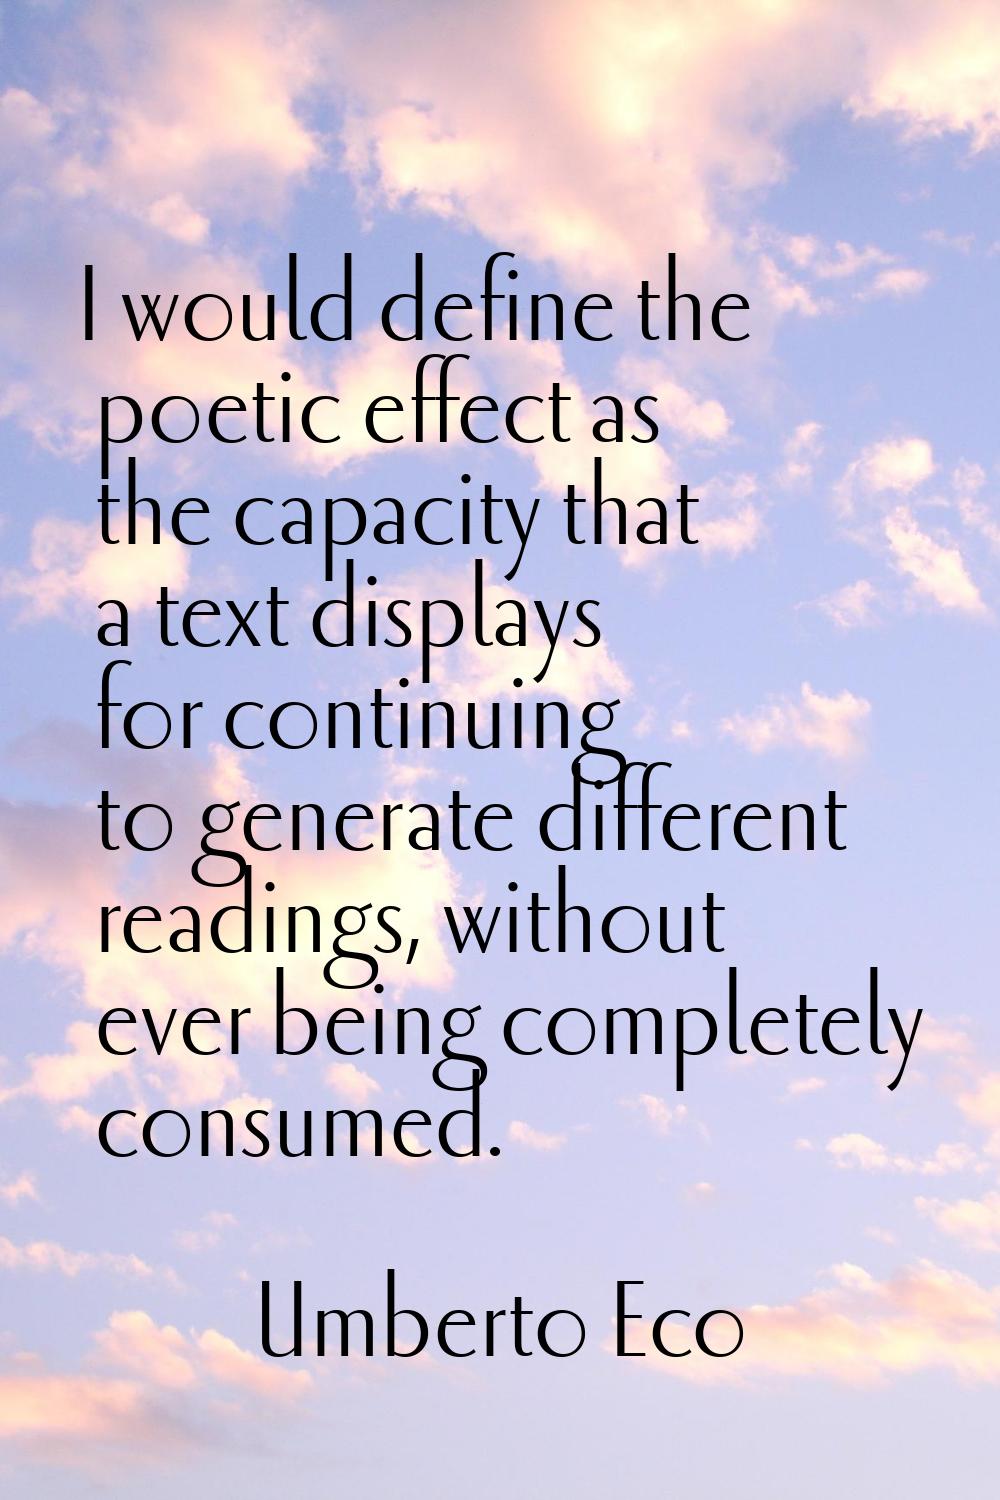 I would define the poetic effect as the capacity that a text displays for continuing to generate di